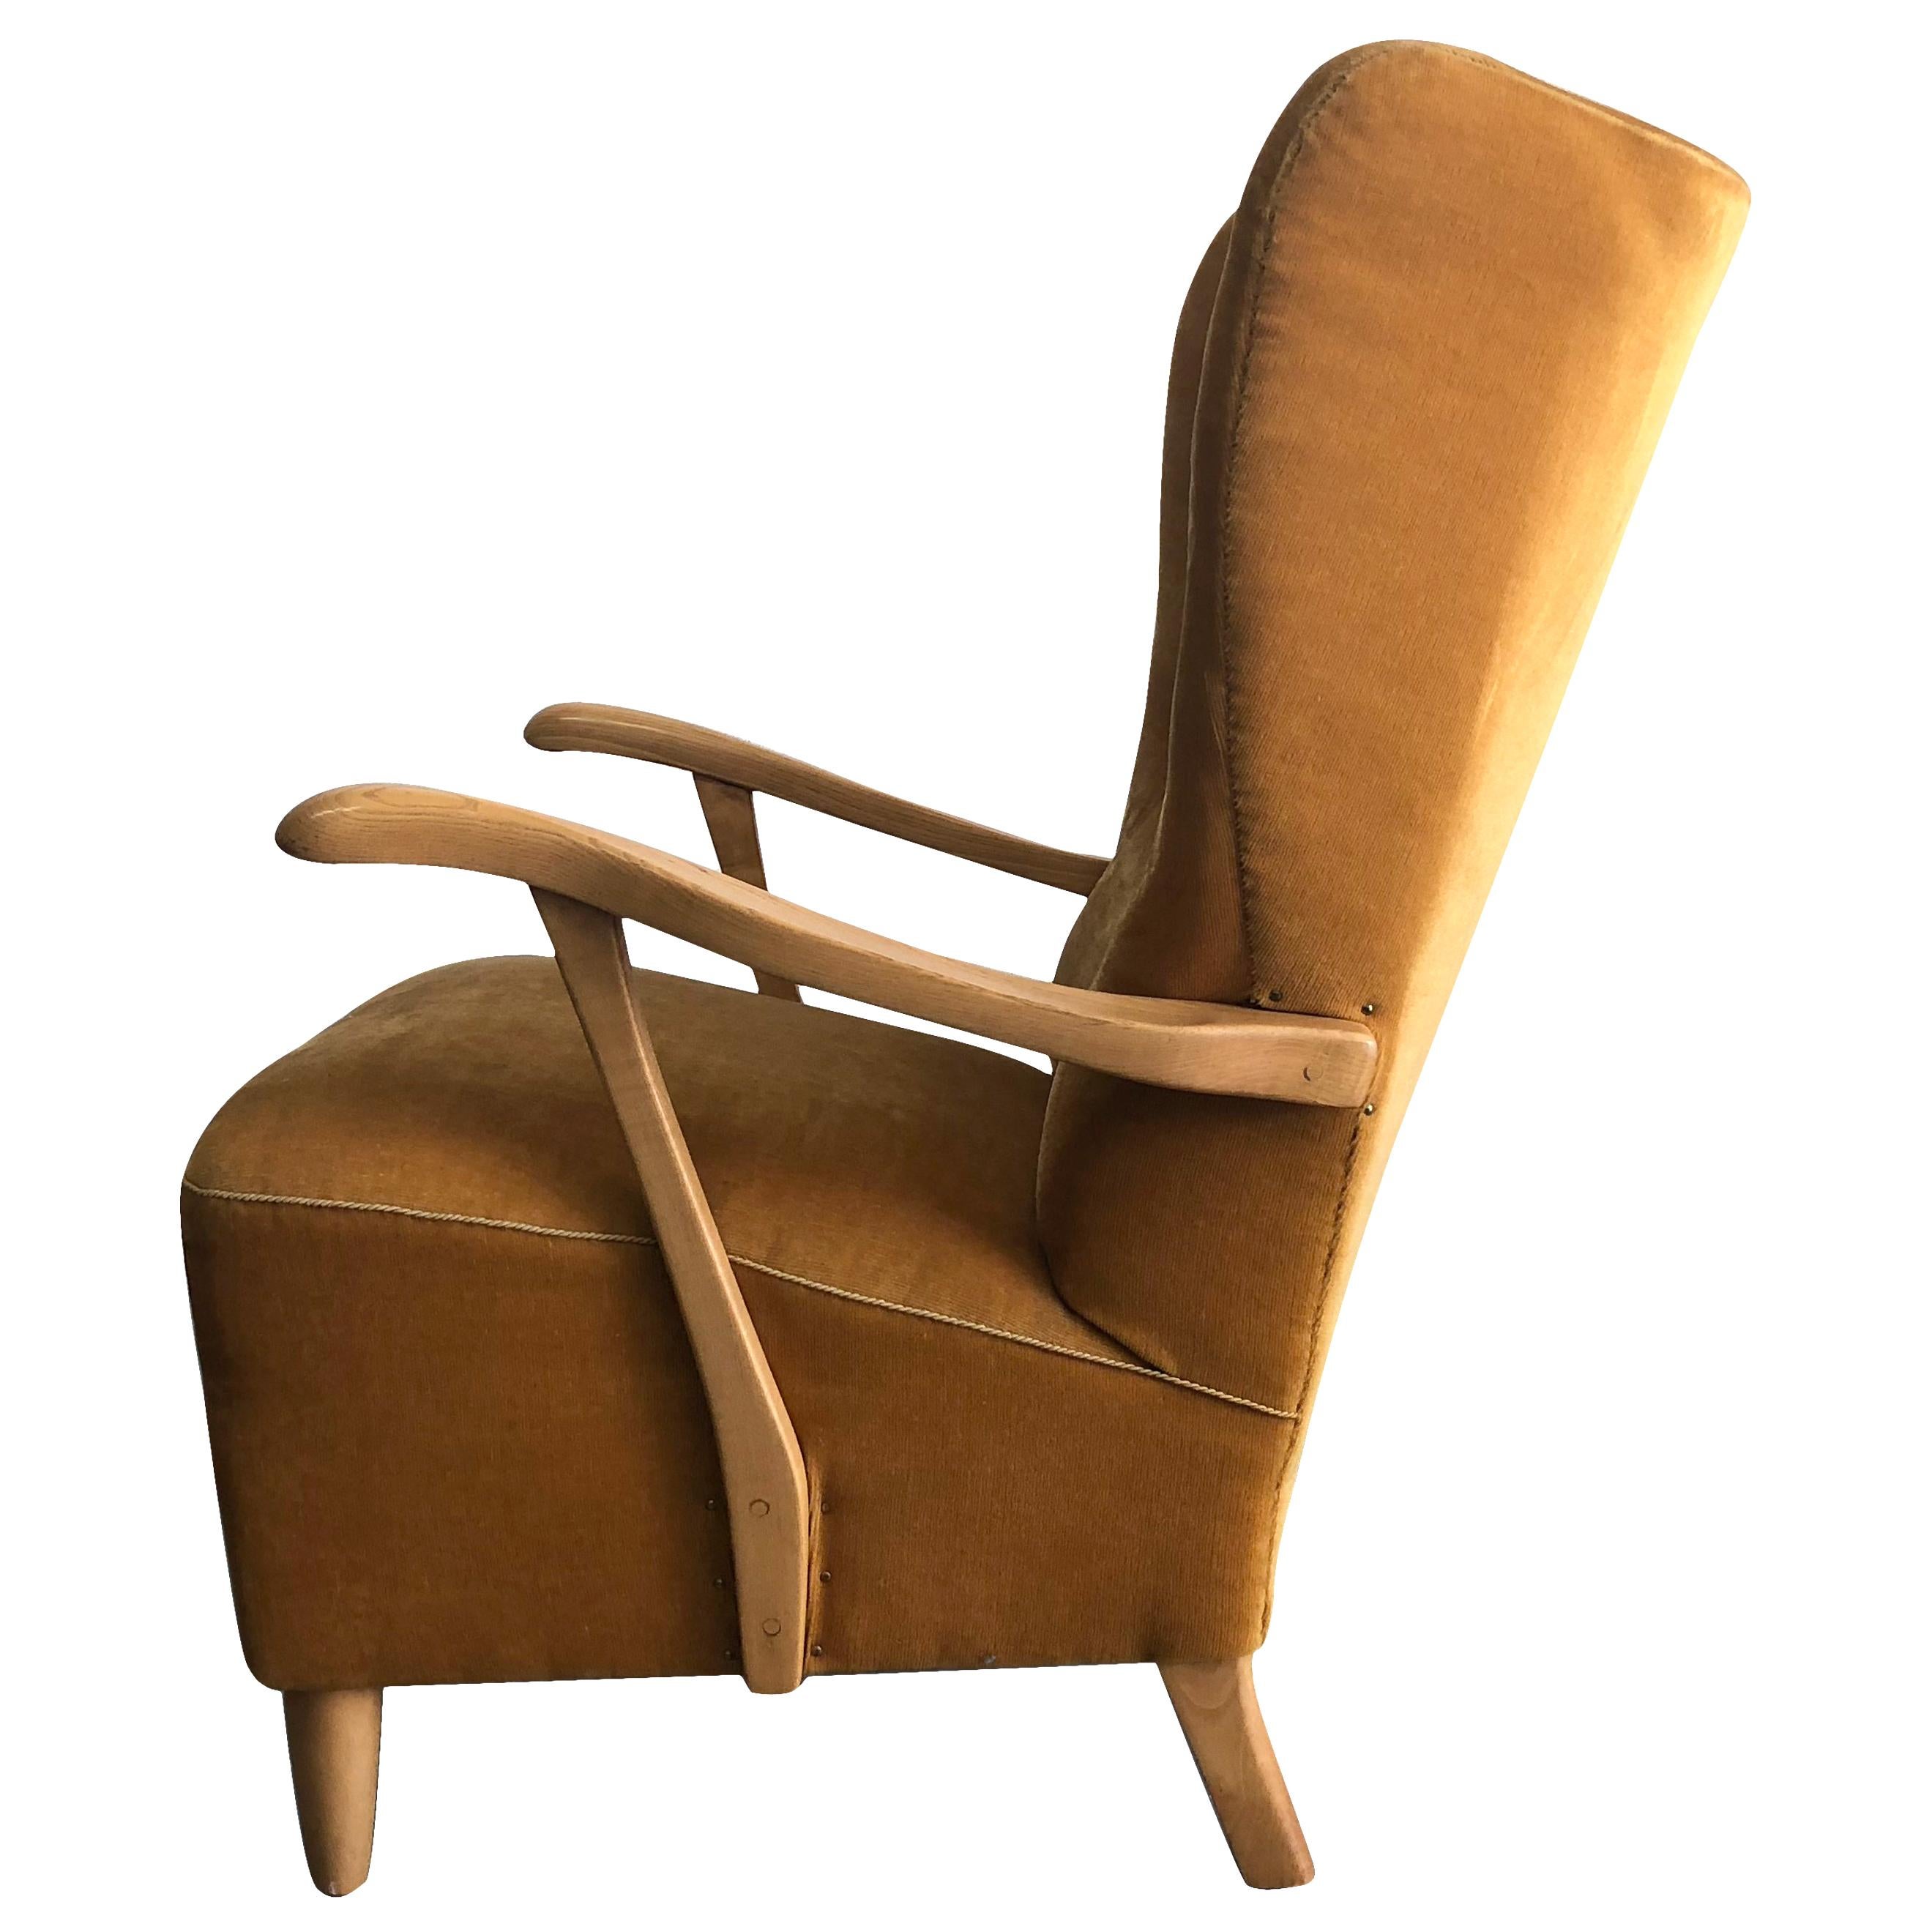 A pair of 1950s ear shaped Swedish Wingback lounge chairs in very good condition with original upholstery and Birchwood, in the style of Carl Malmsten.

Seat 18” H x 19.5” D.